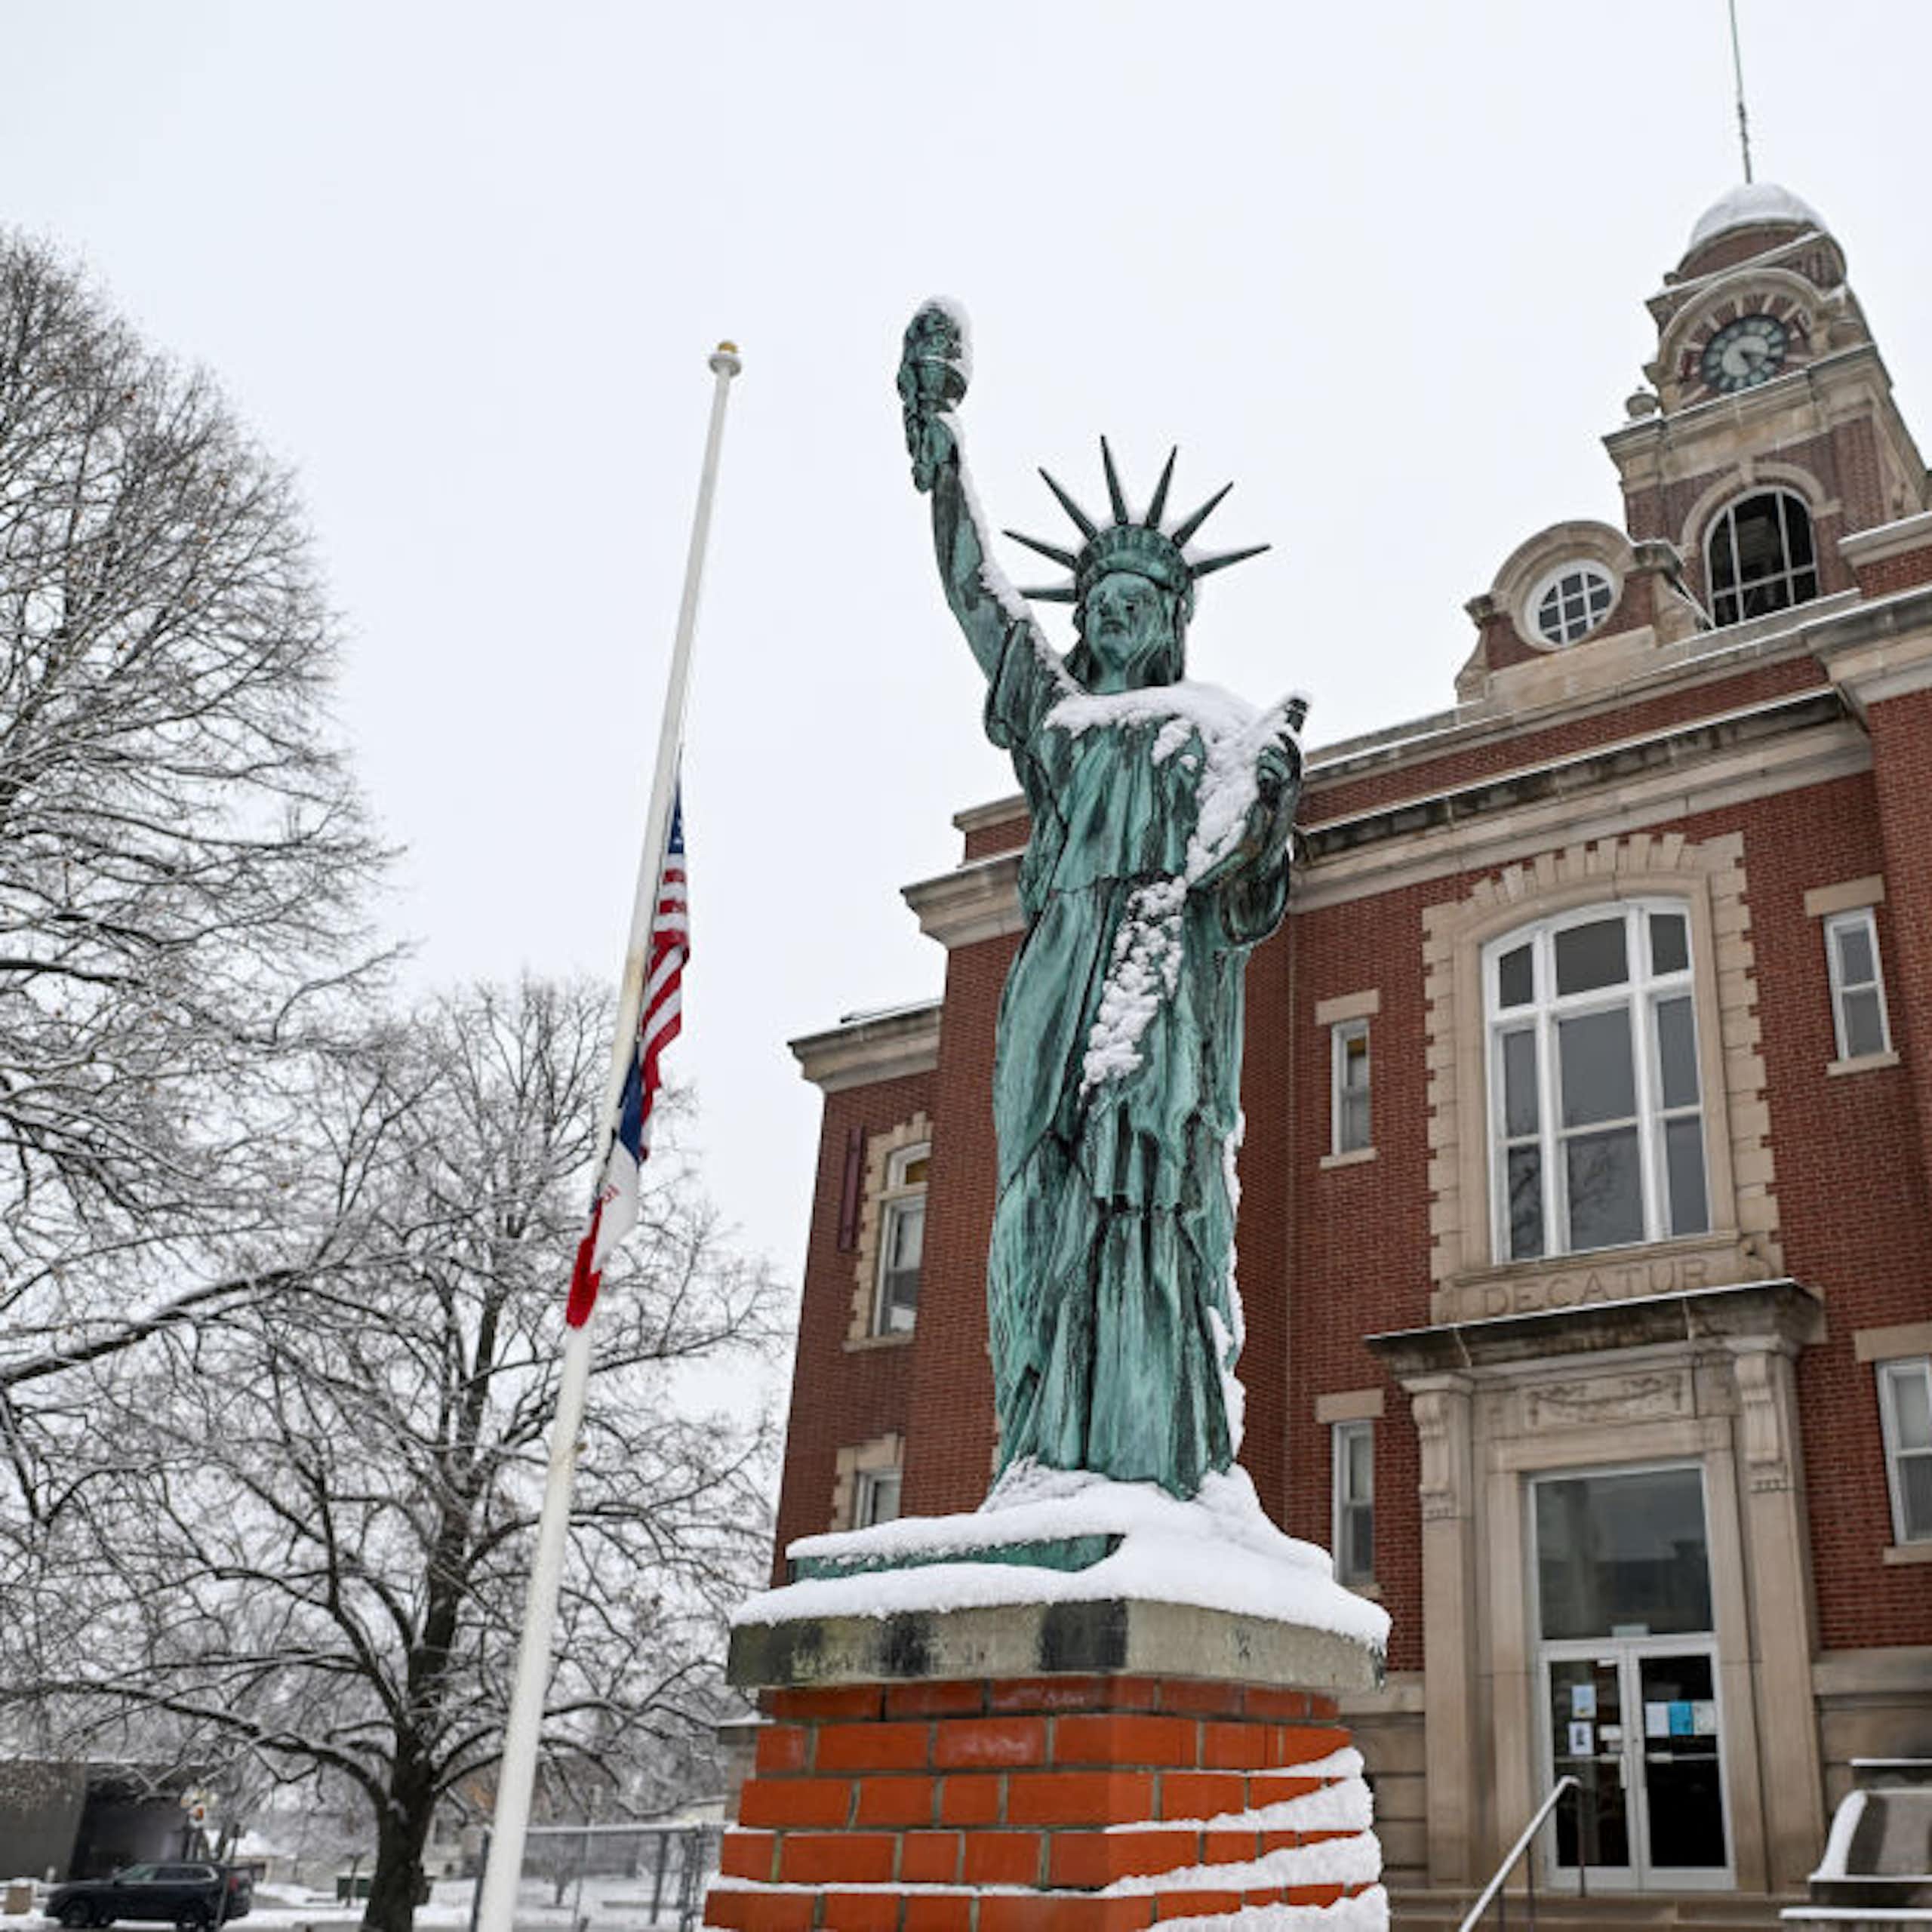 A green-gray statue is lightly covered in snow, standing in front of a brick building with a tower.